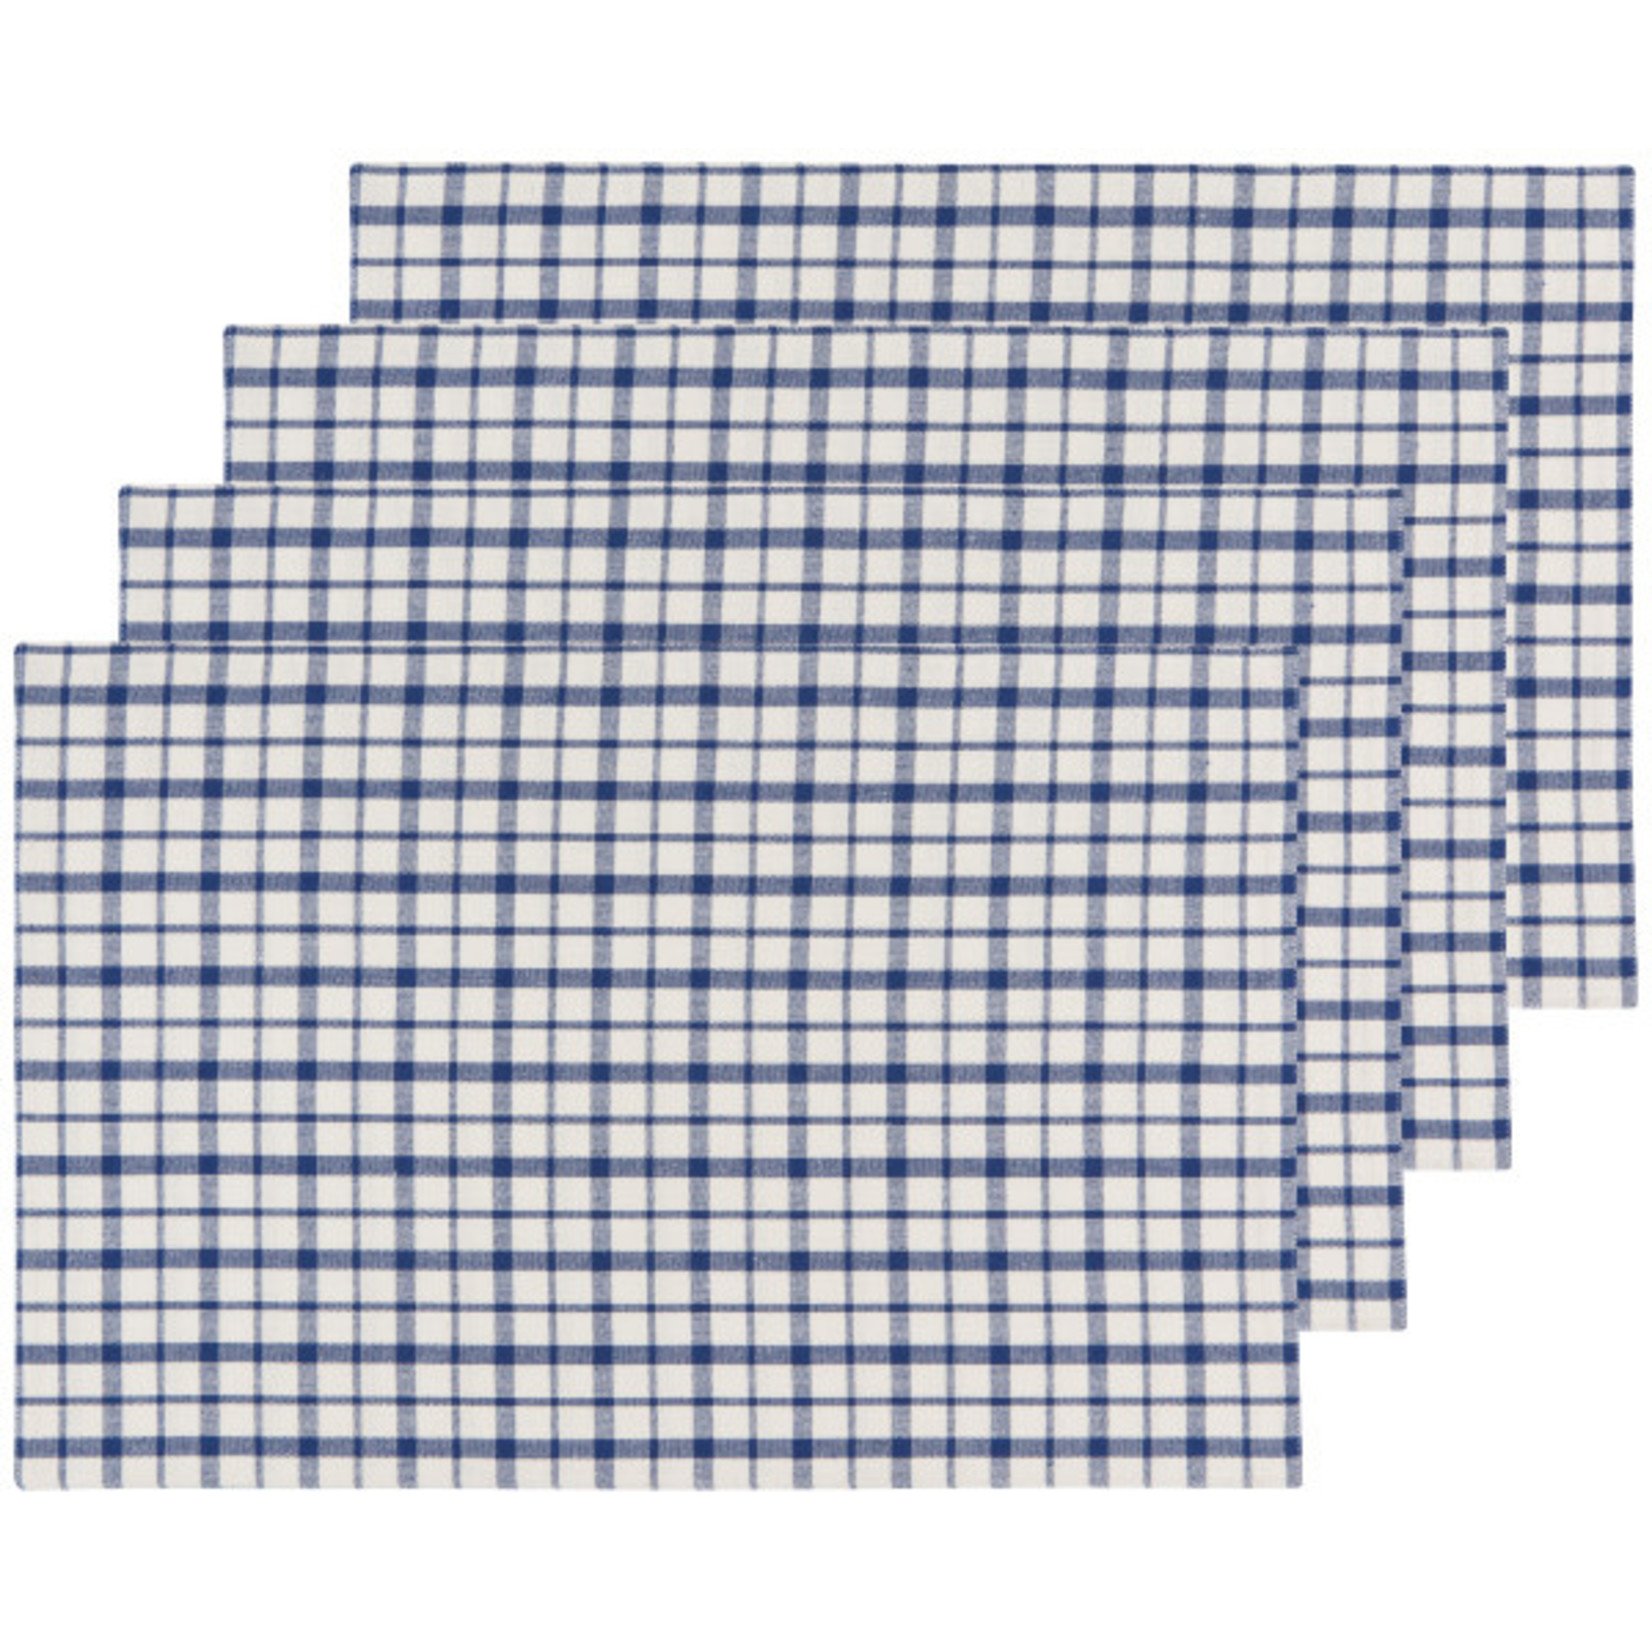 Second Spin Belle Plaid - Placemat S/4